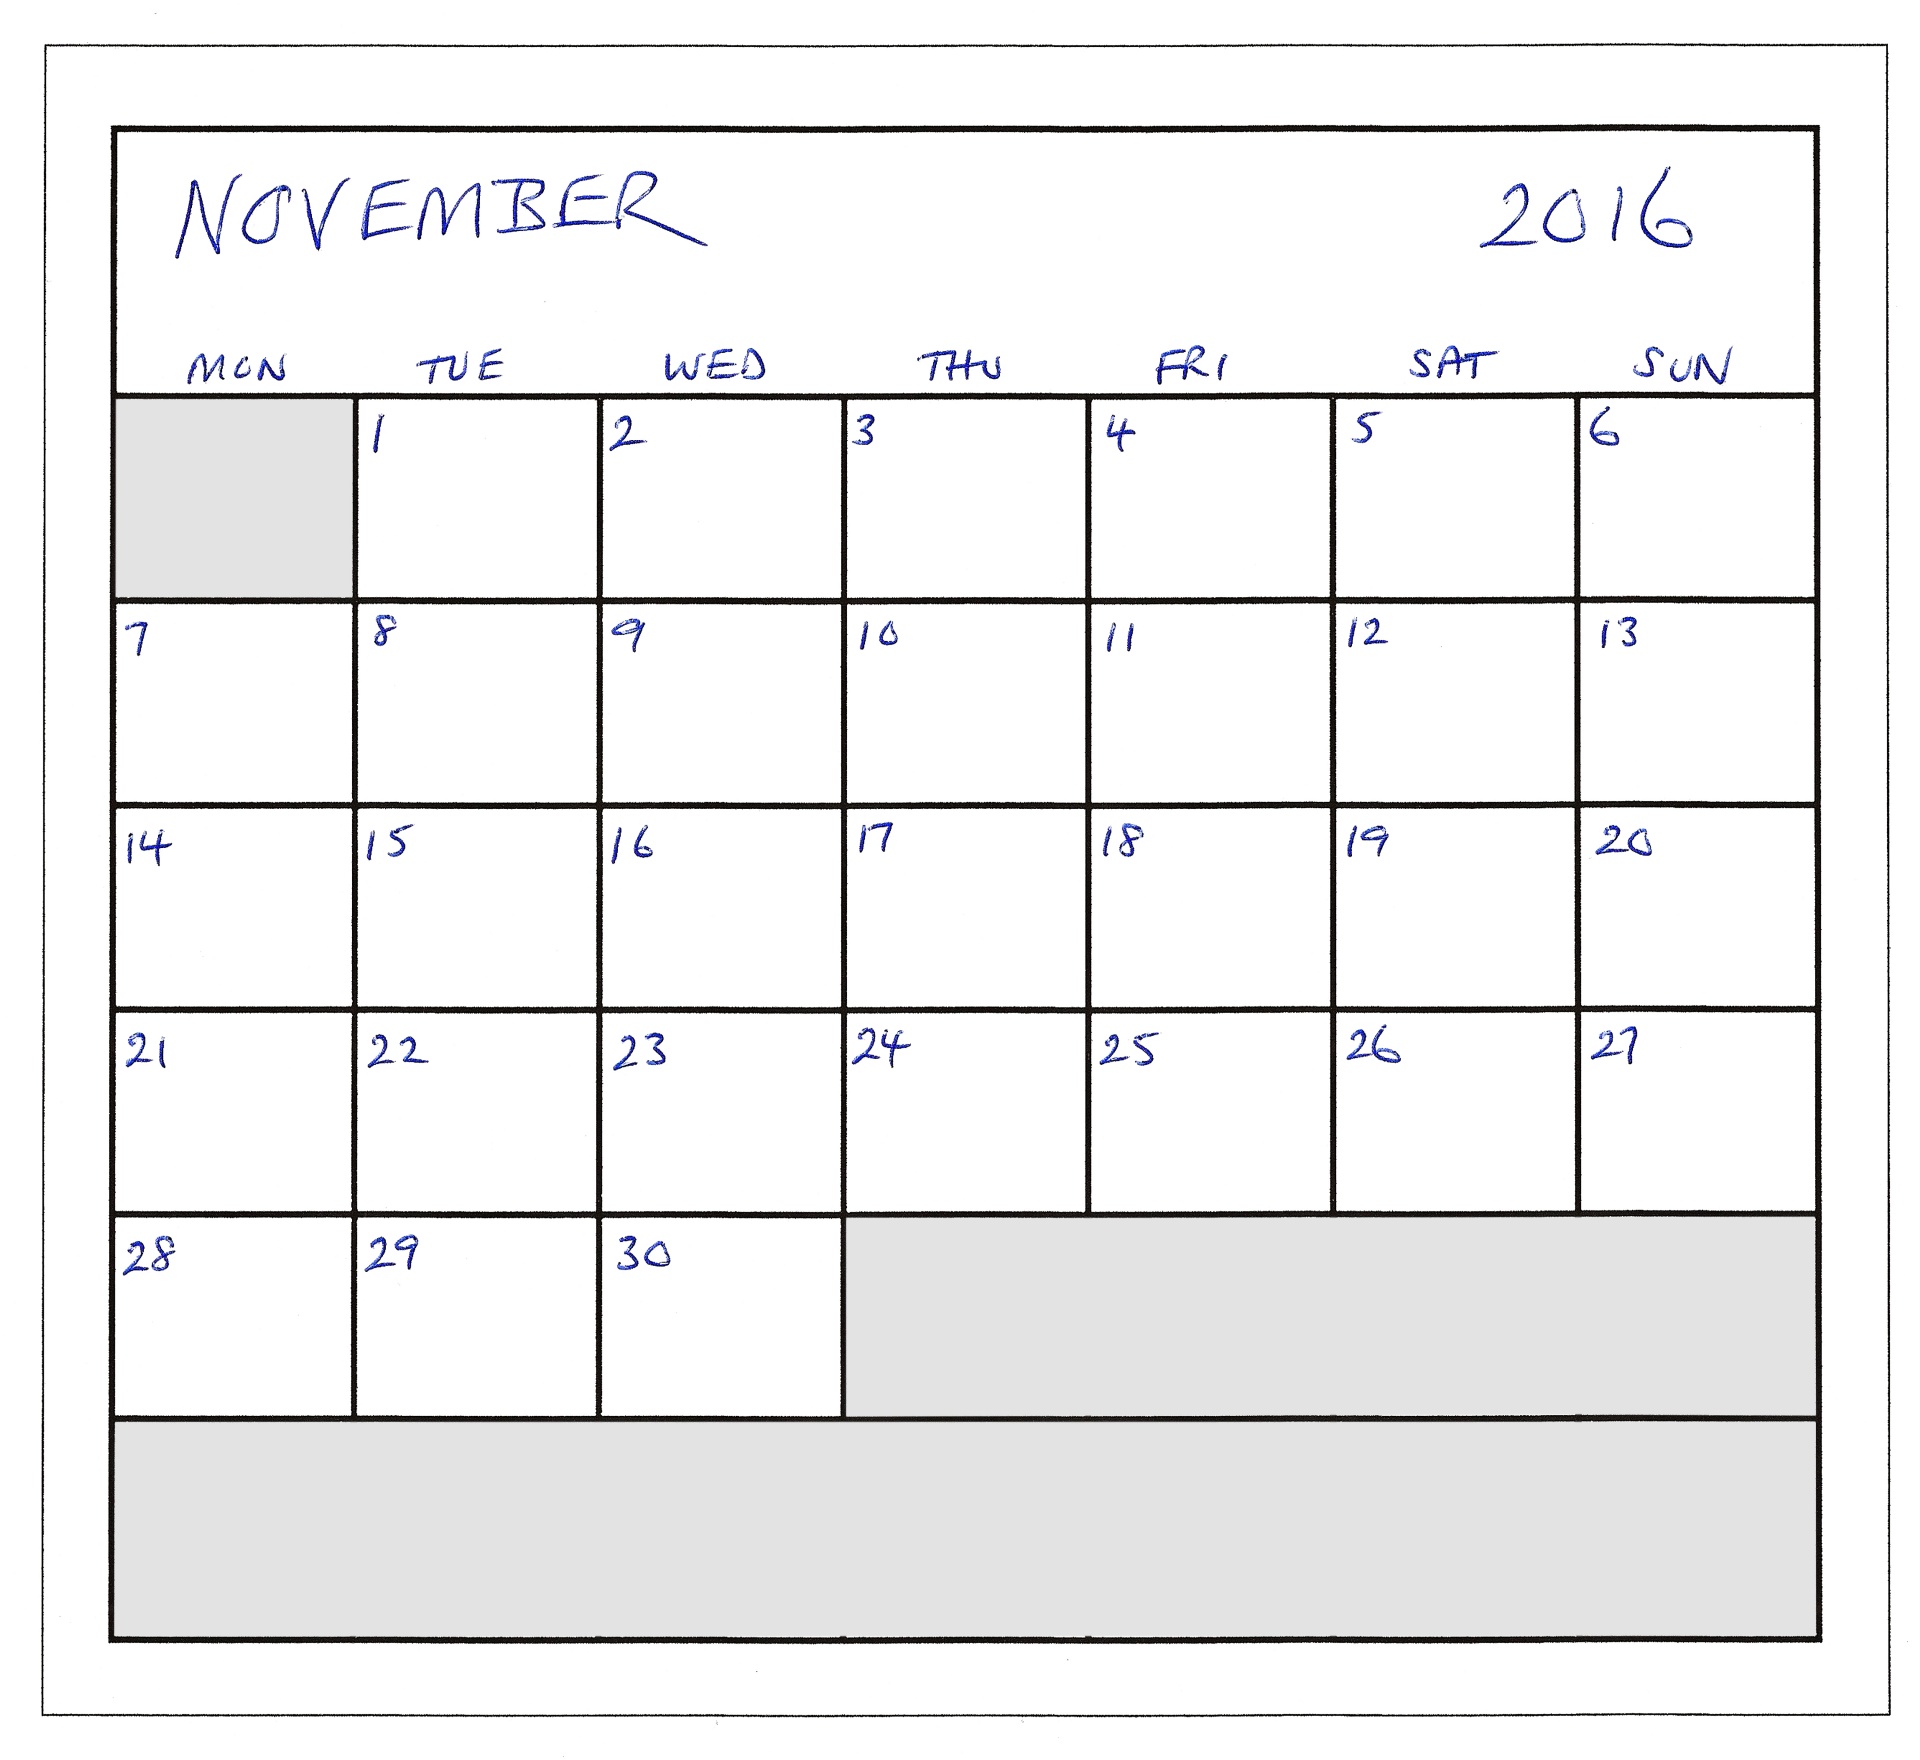 Day Thanksgiving Calendar Date Royalty-Free Images, Stock Photos & Pictures